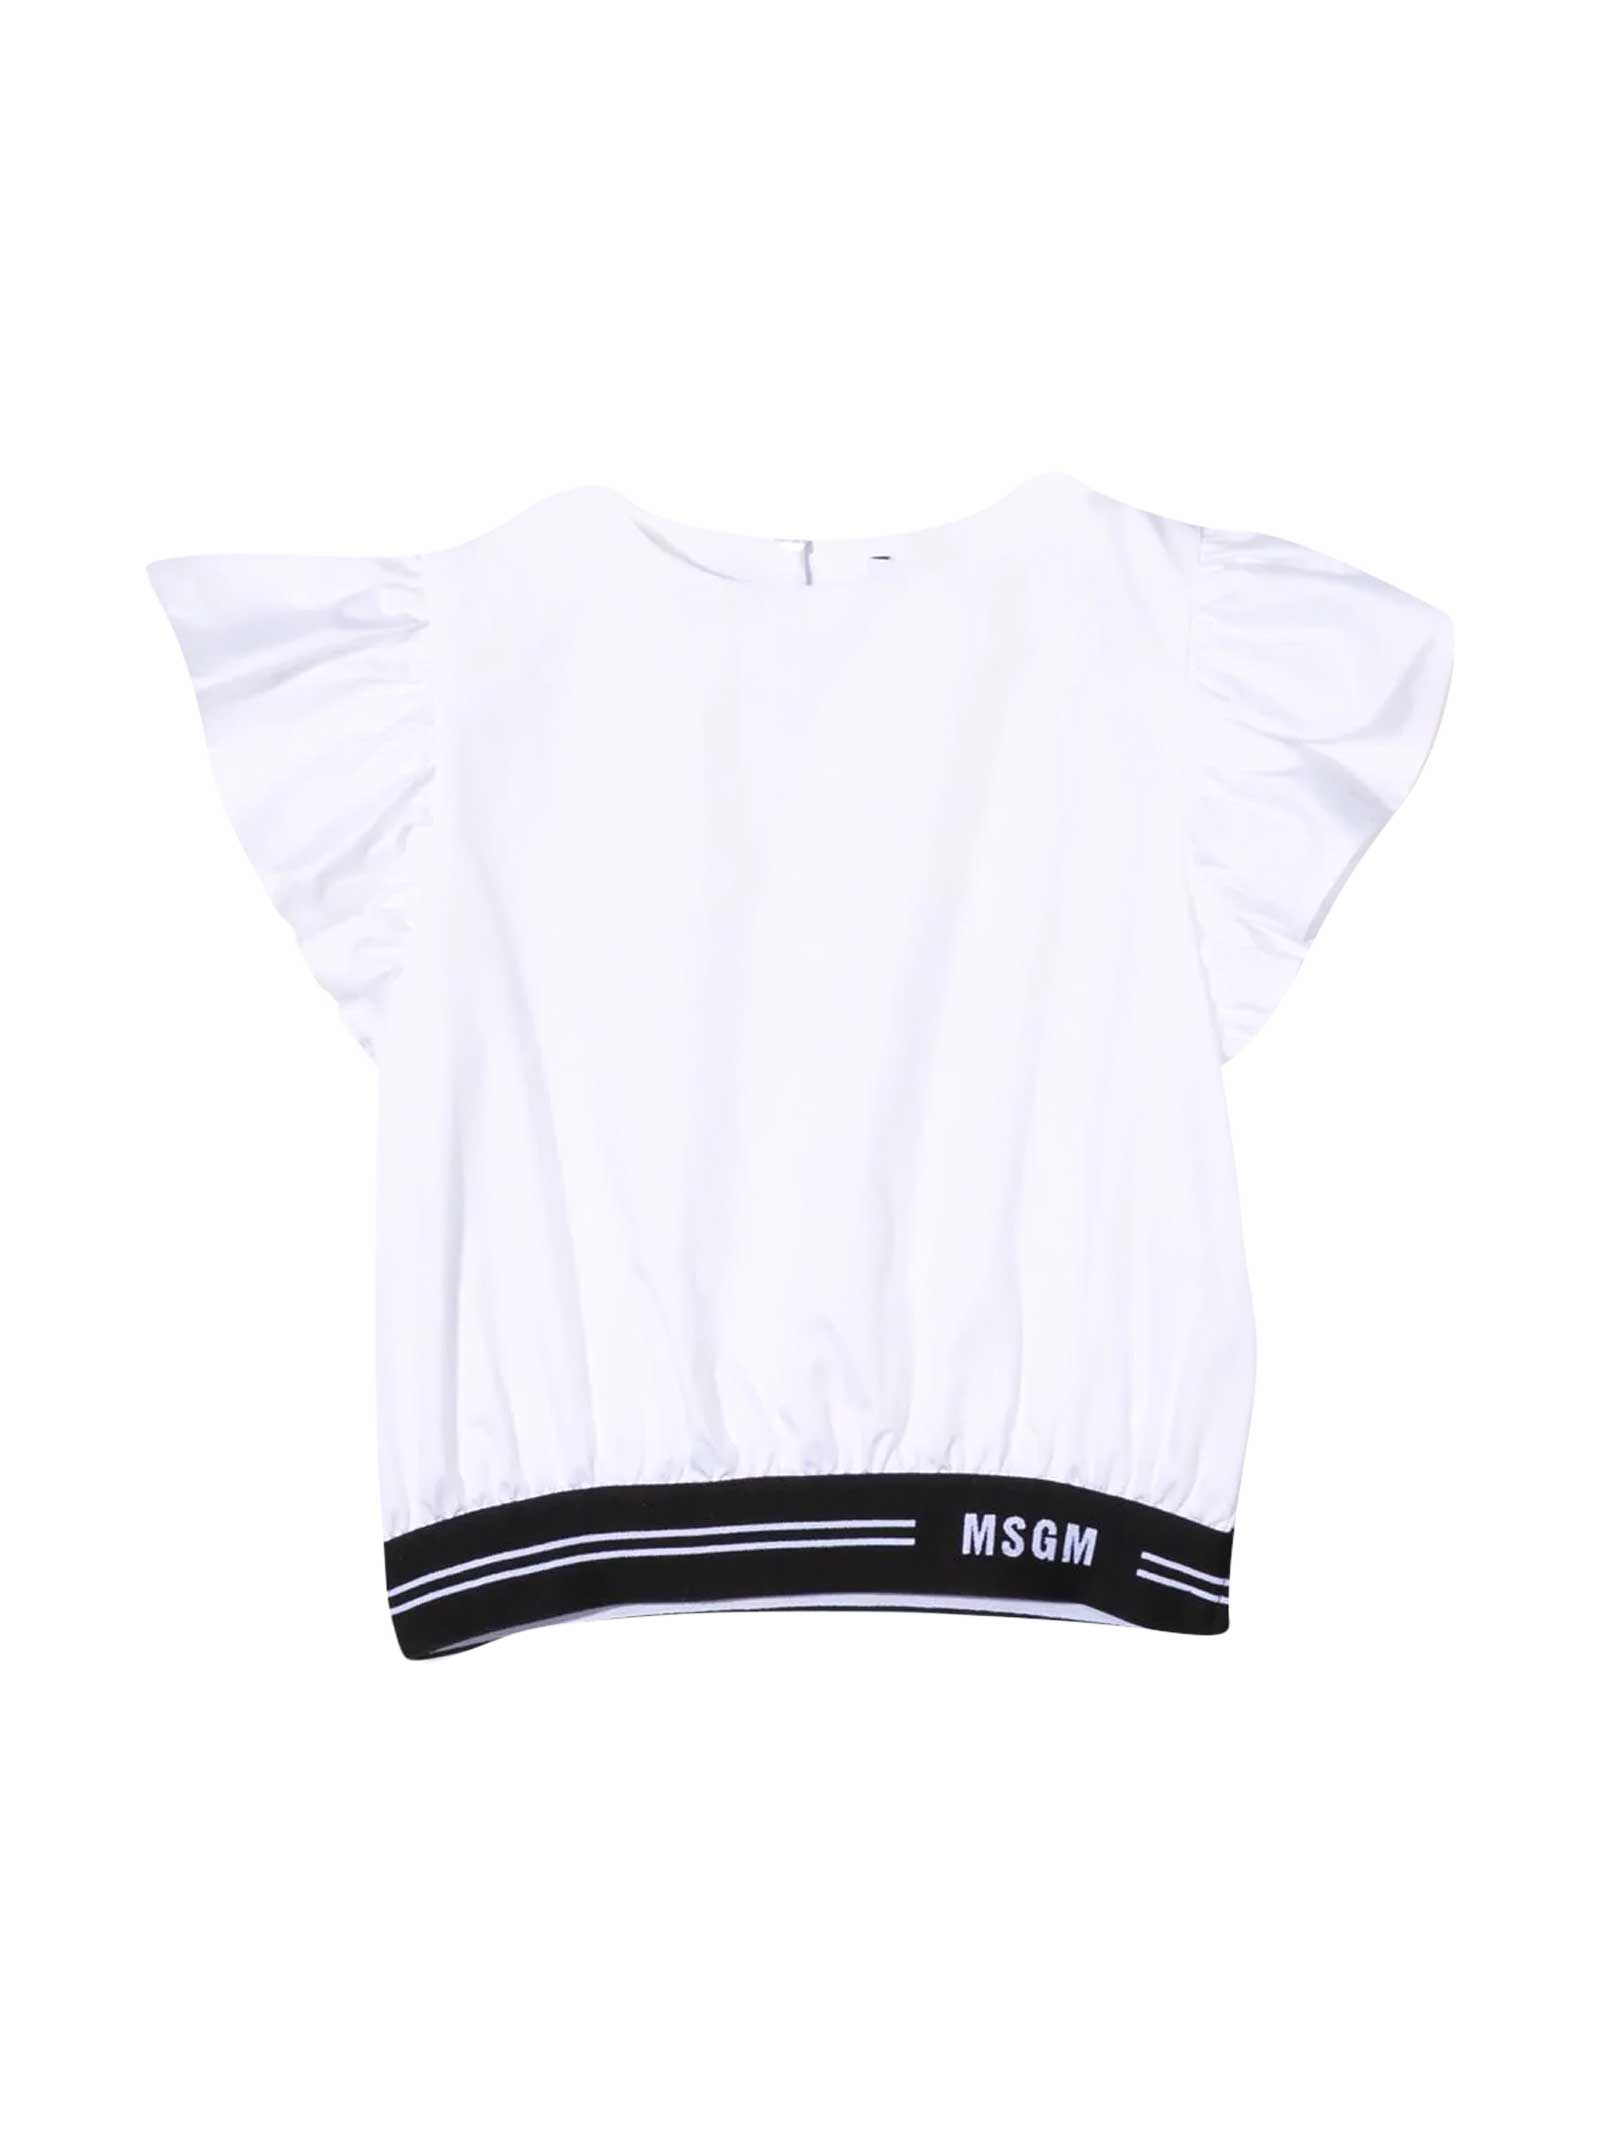 MSGM White Blouse With Black Logoed Band